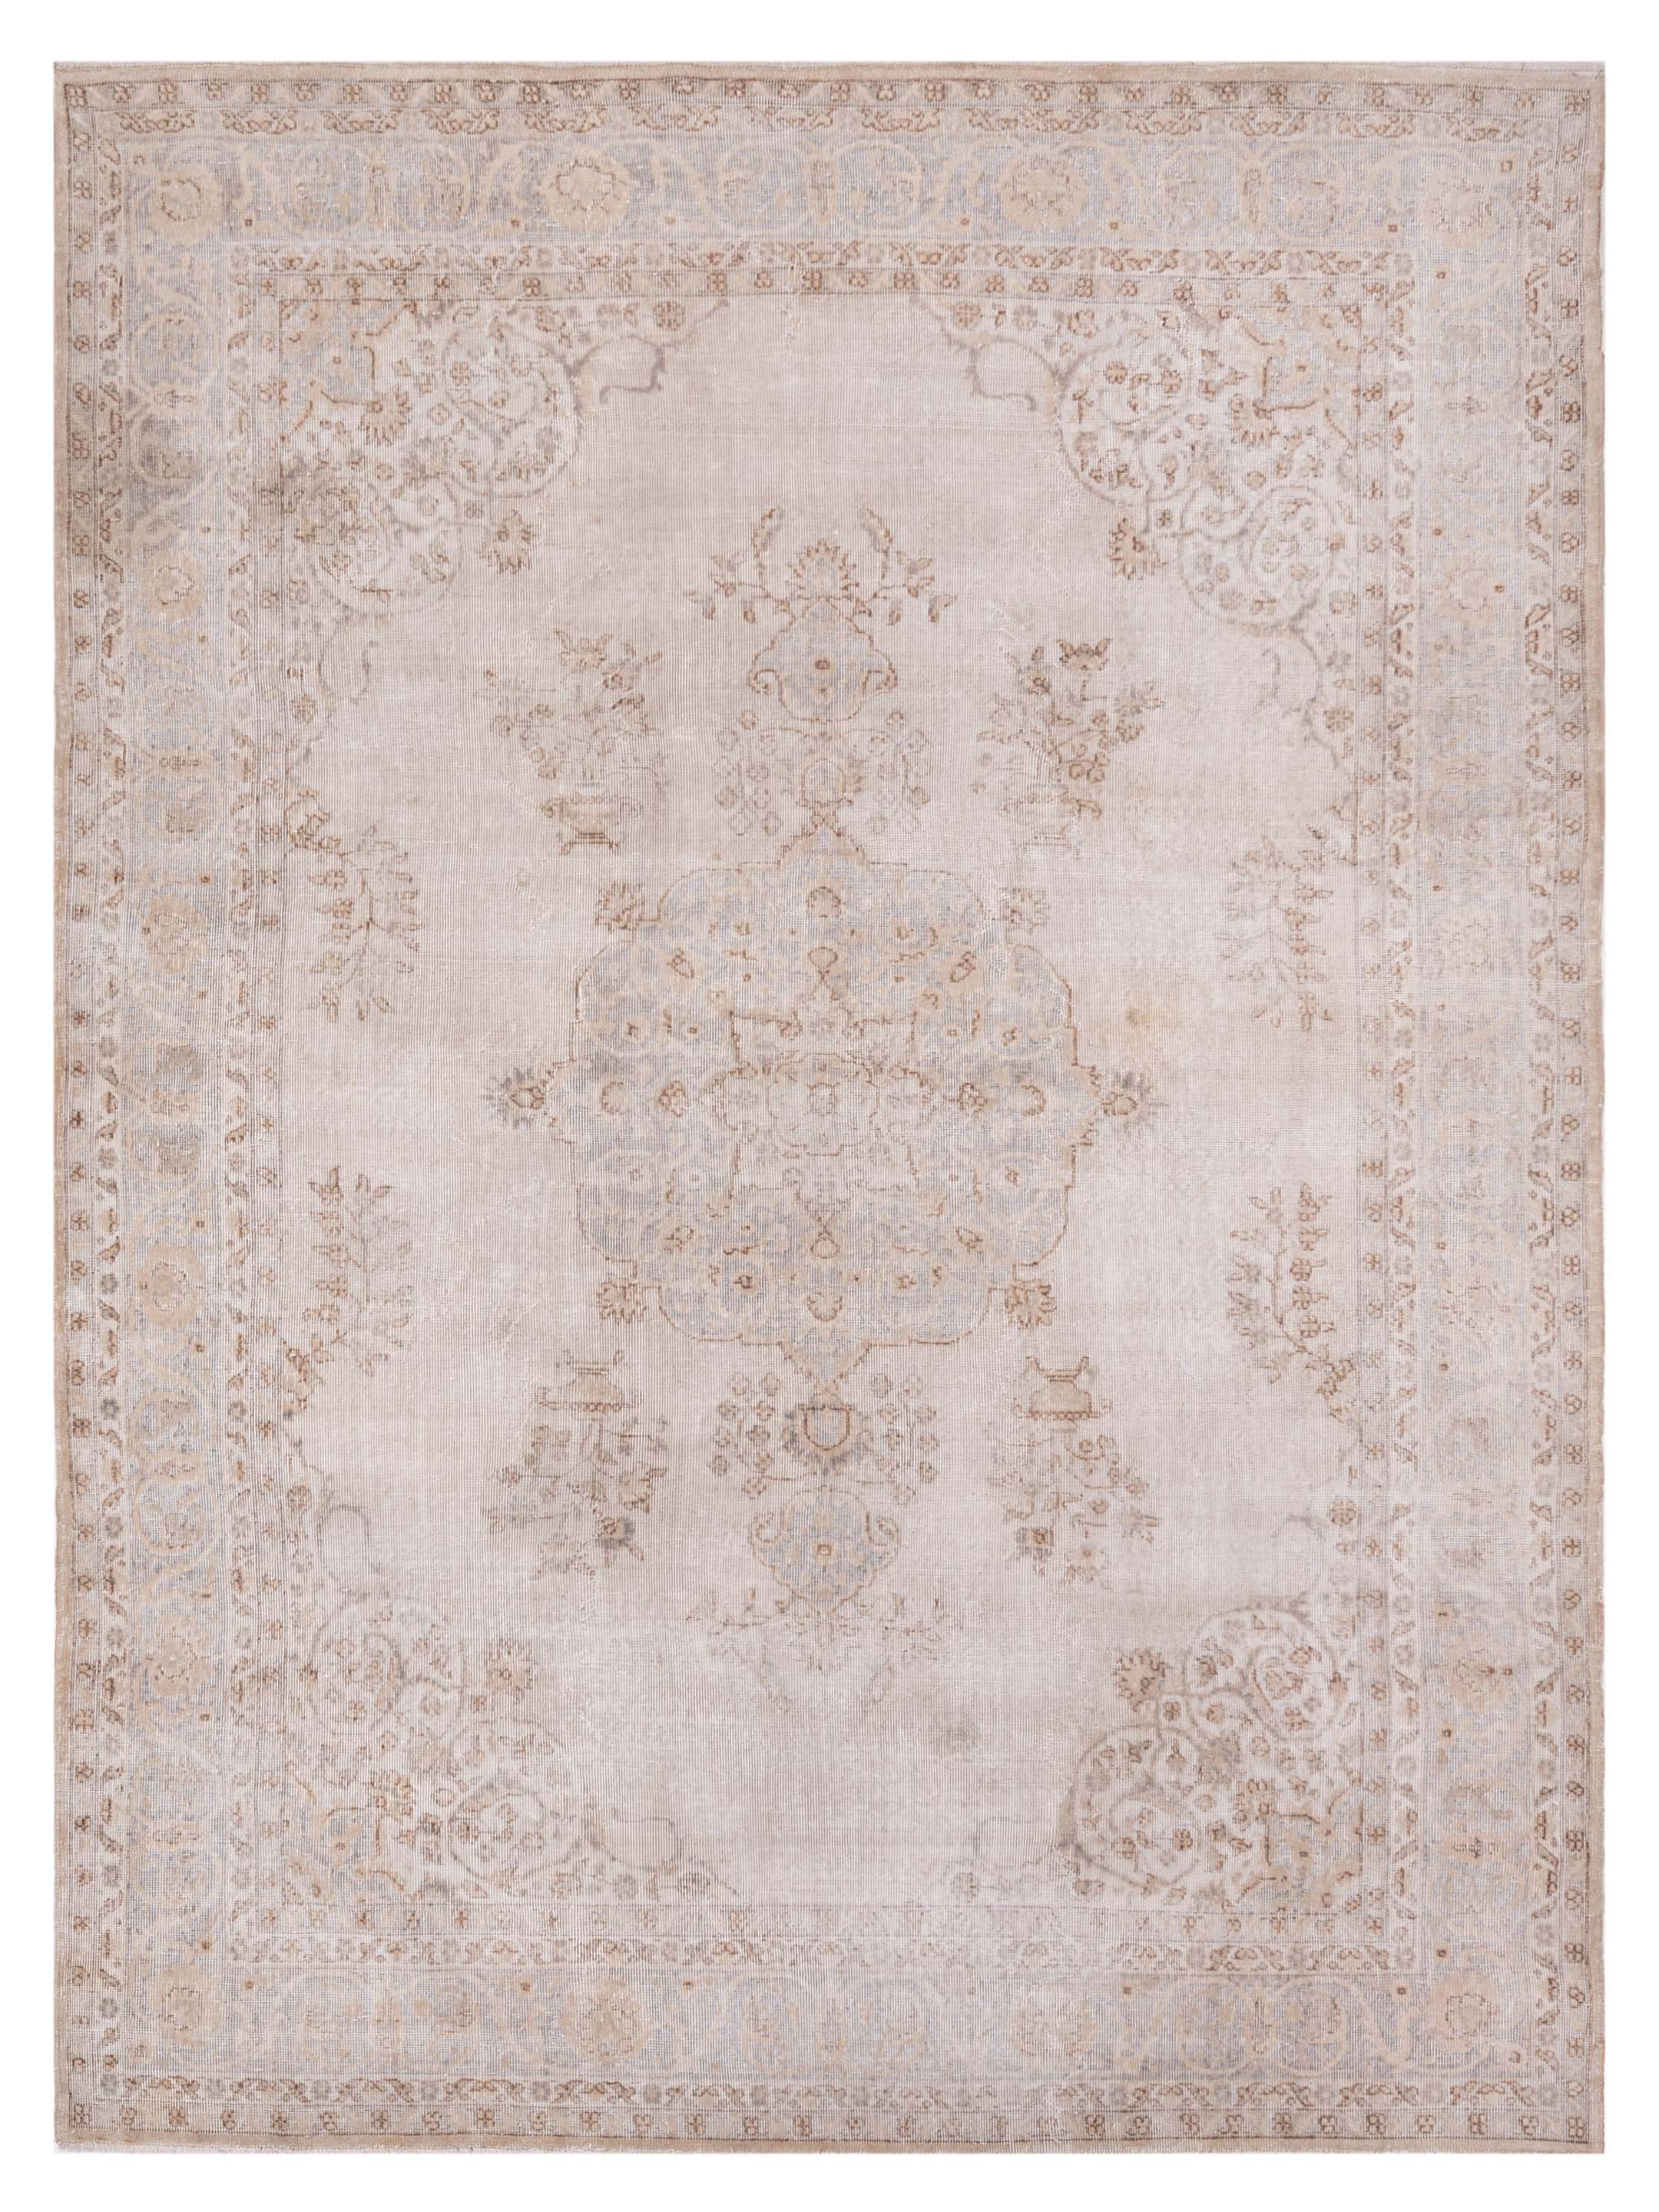 Ivory Silver vintage hand-knotted Turkish area rug	